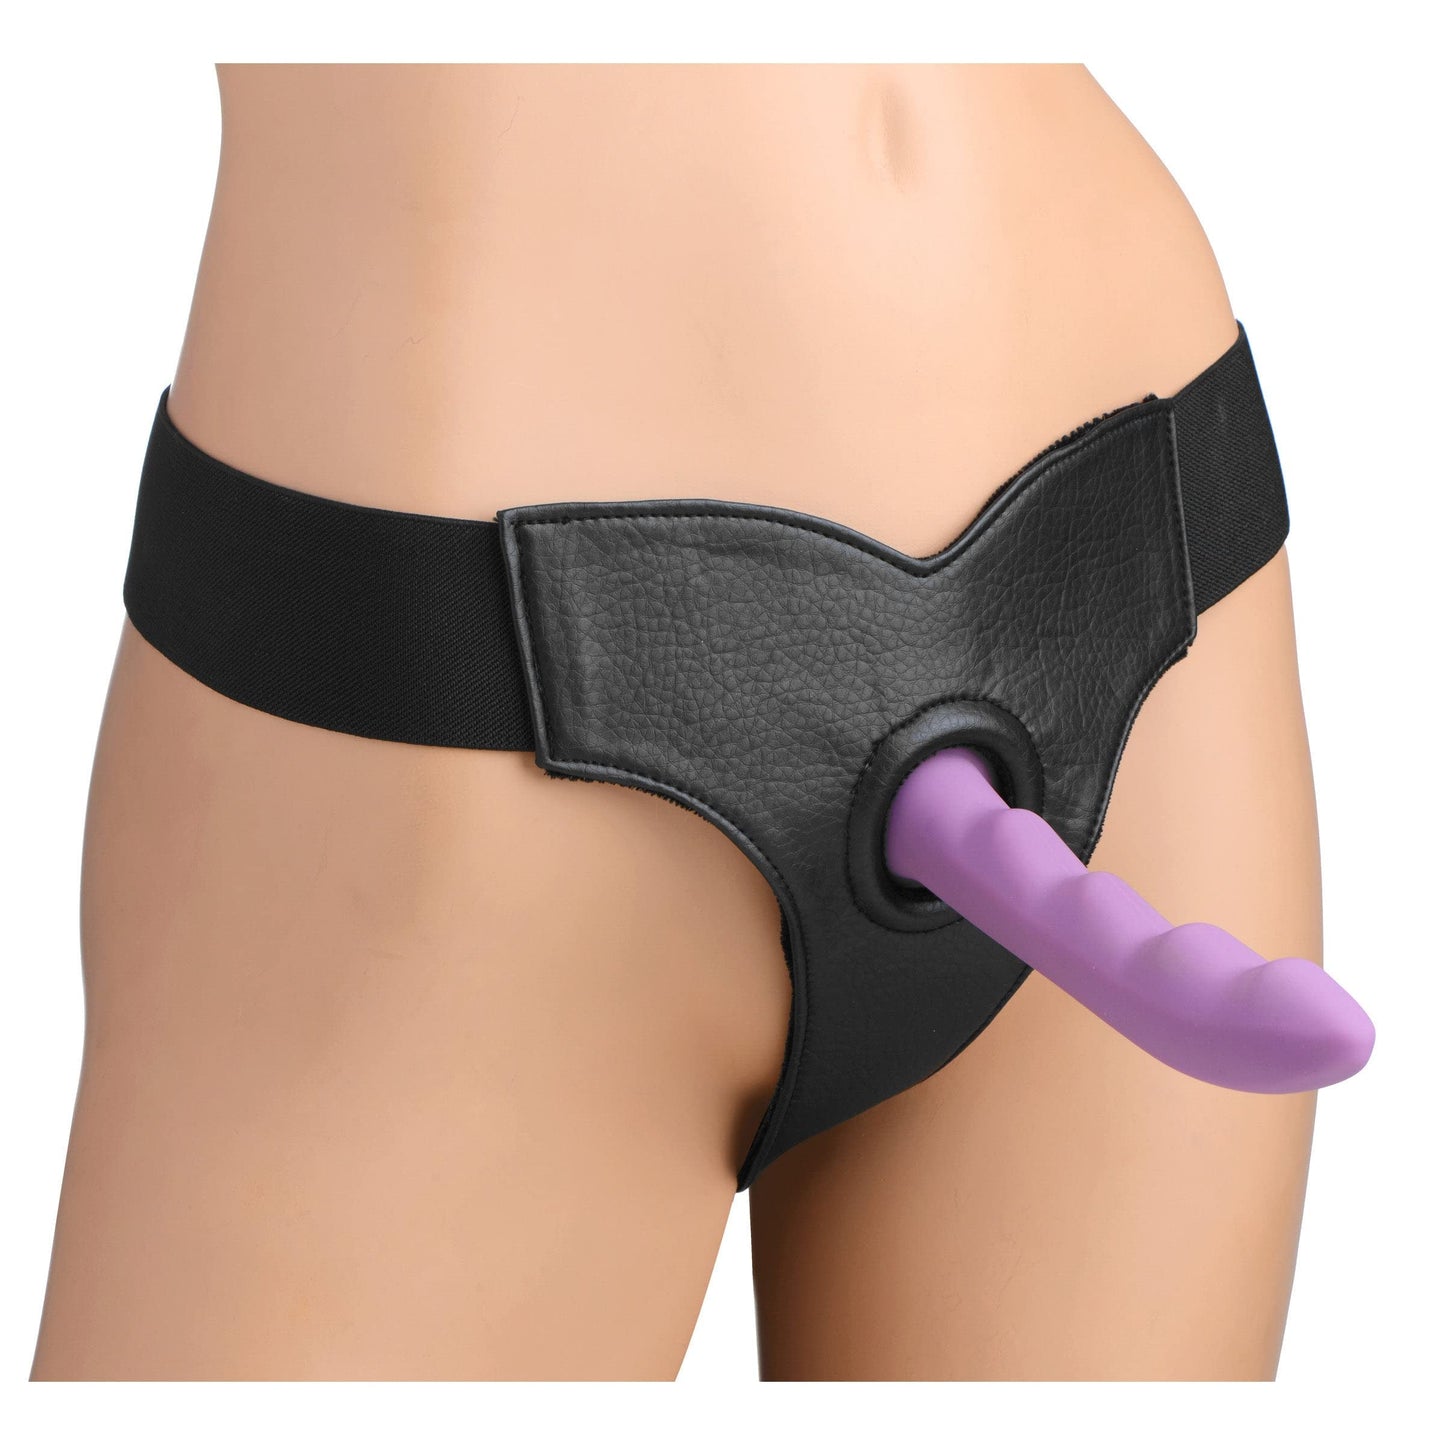 Black stretchy harness with triangular piece at the front with a hole to secure a dildo (not included)